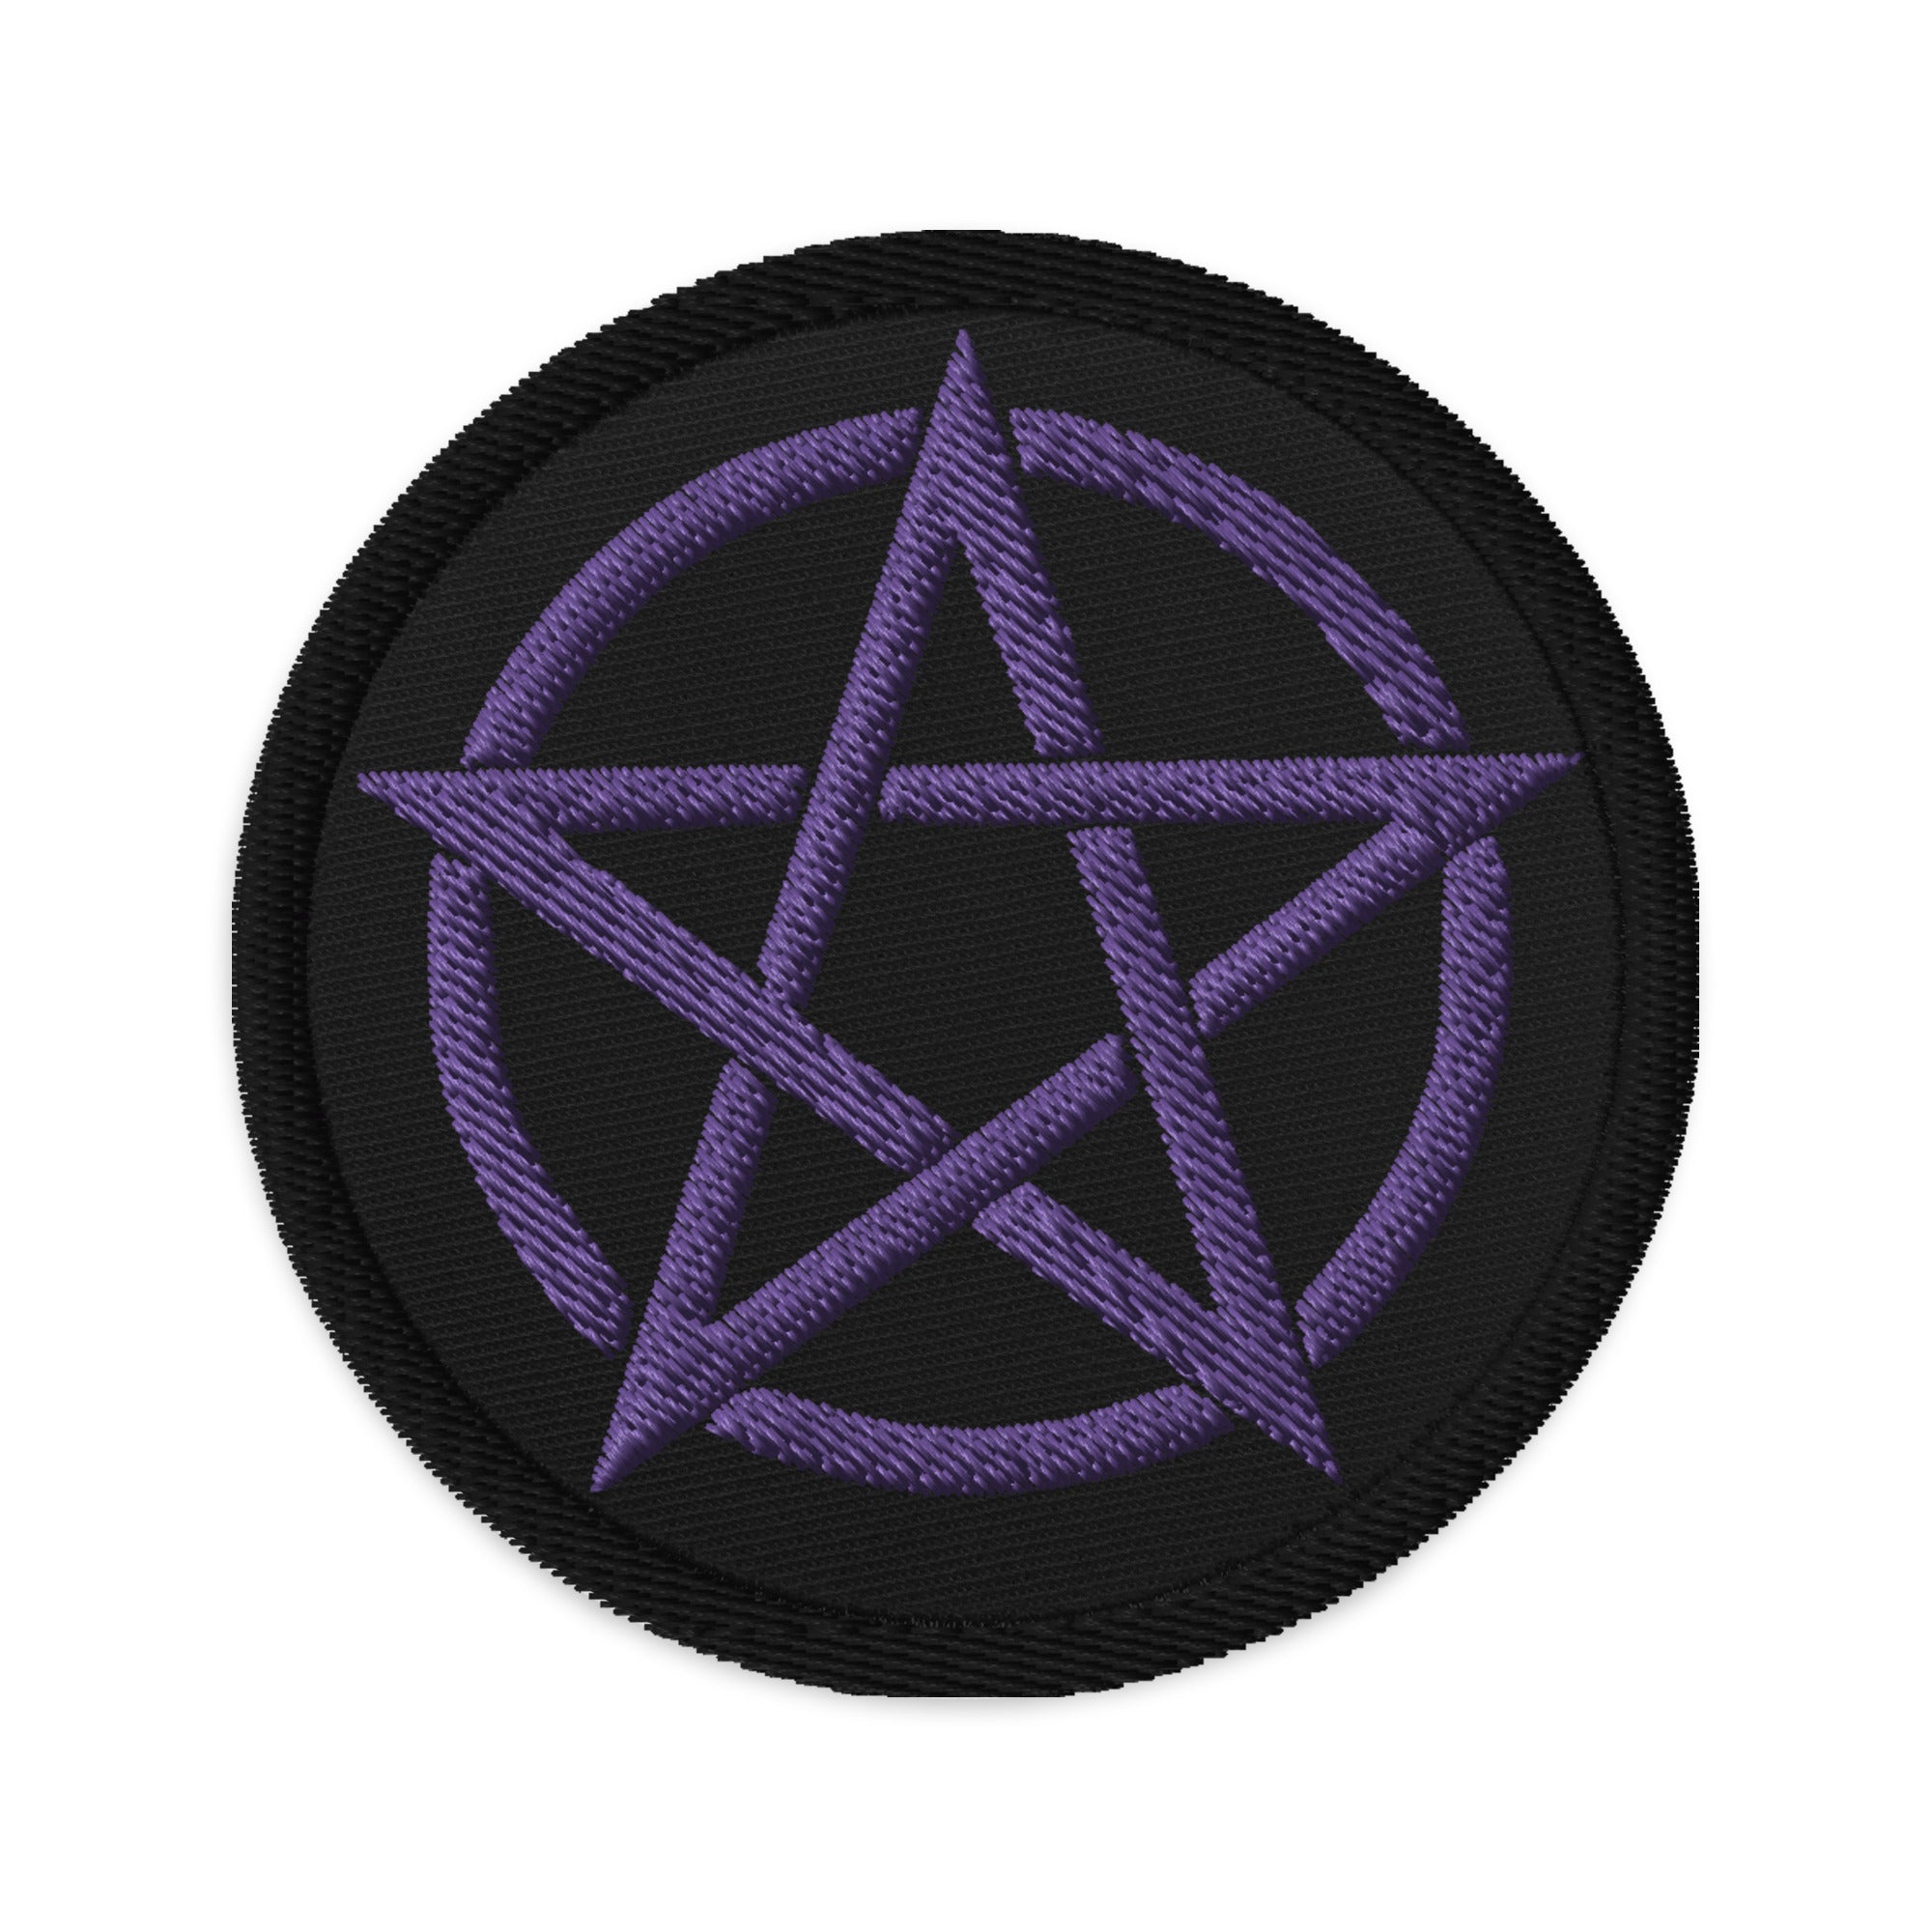 Witchcraft Woven Pentacle Pagan Ritual Embroidered Patch Pentagram - Edge of Life Designs